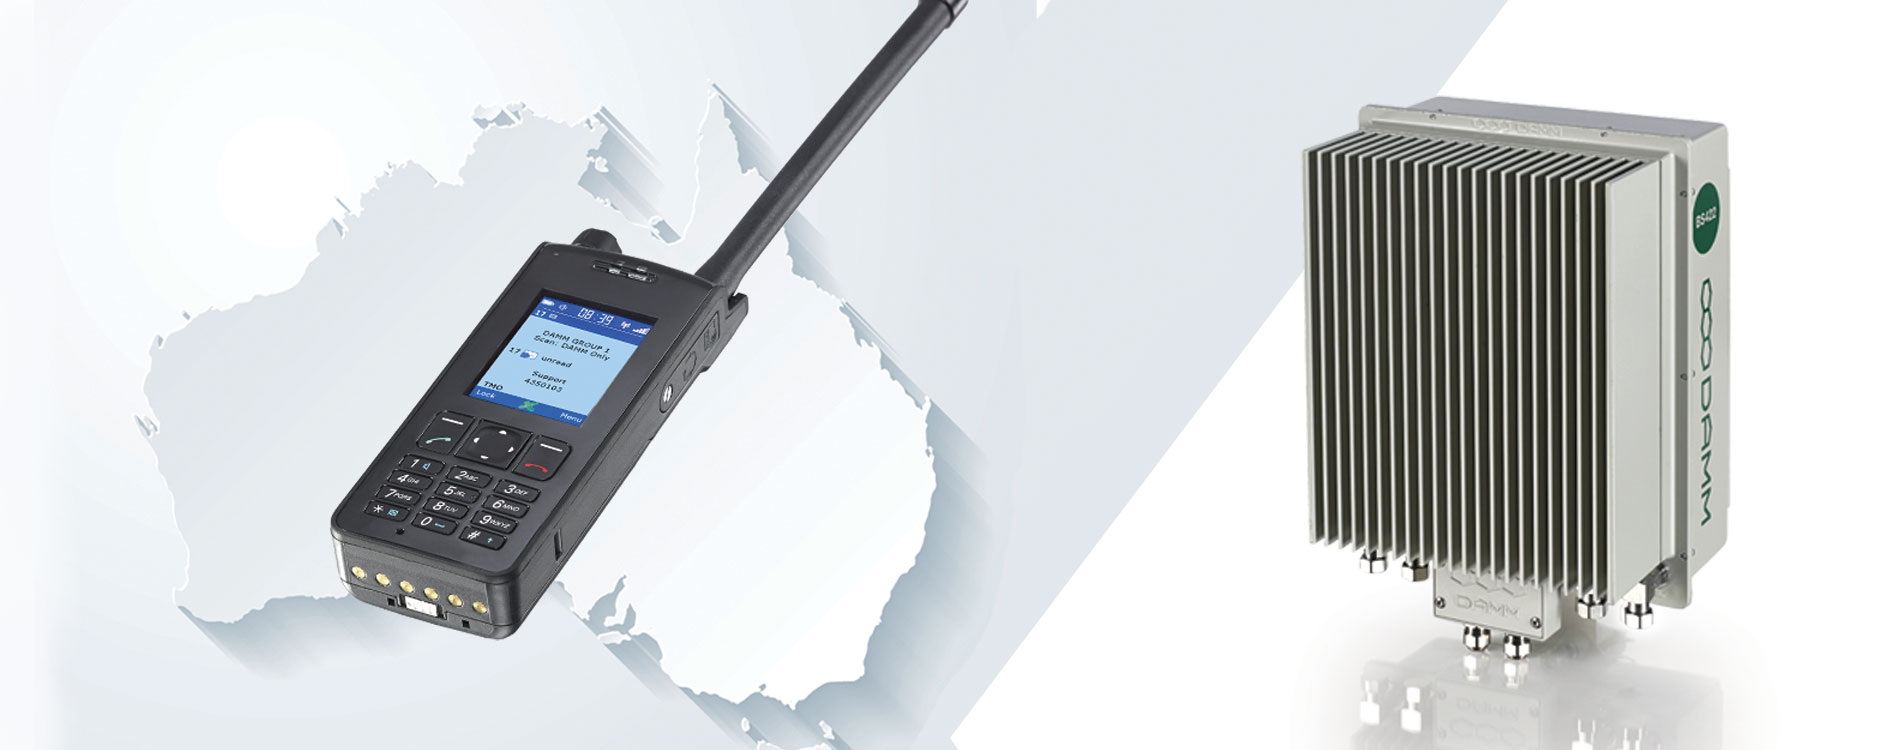 DAMM Australia obtains approved VHF TETRA frequencies